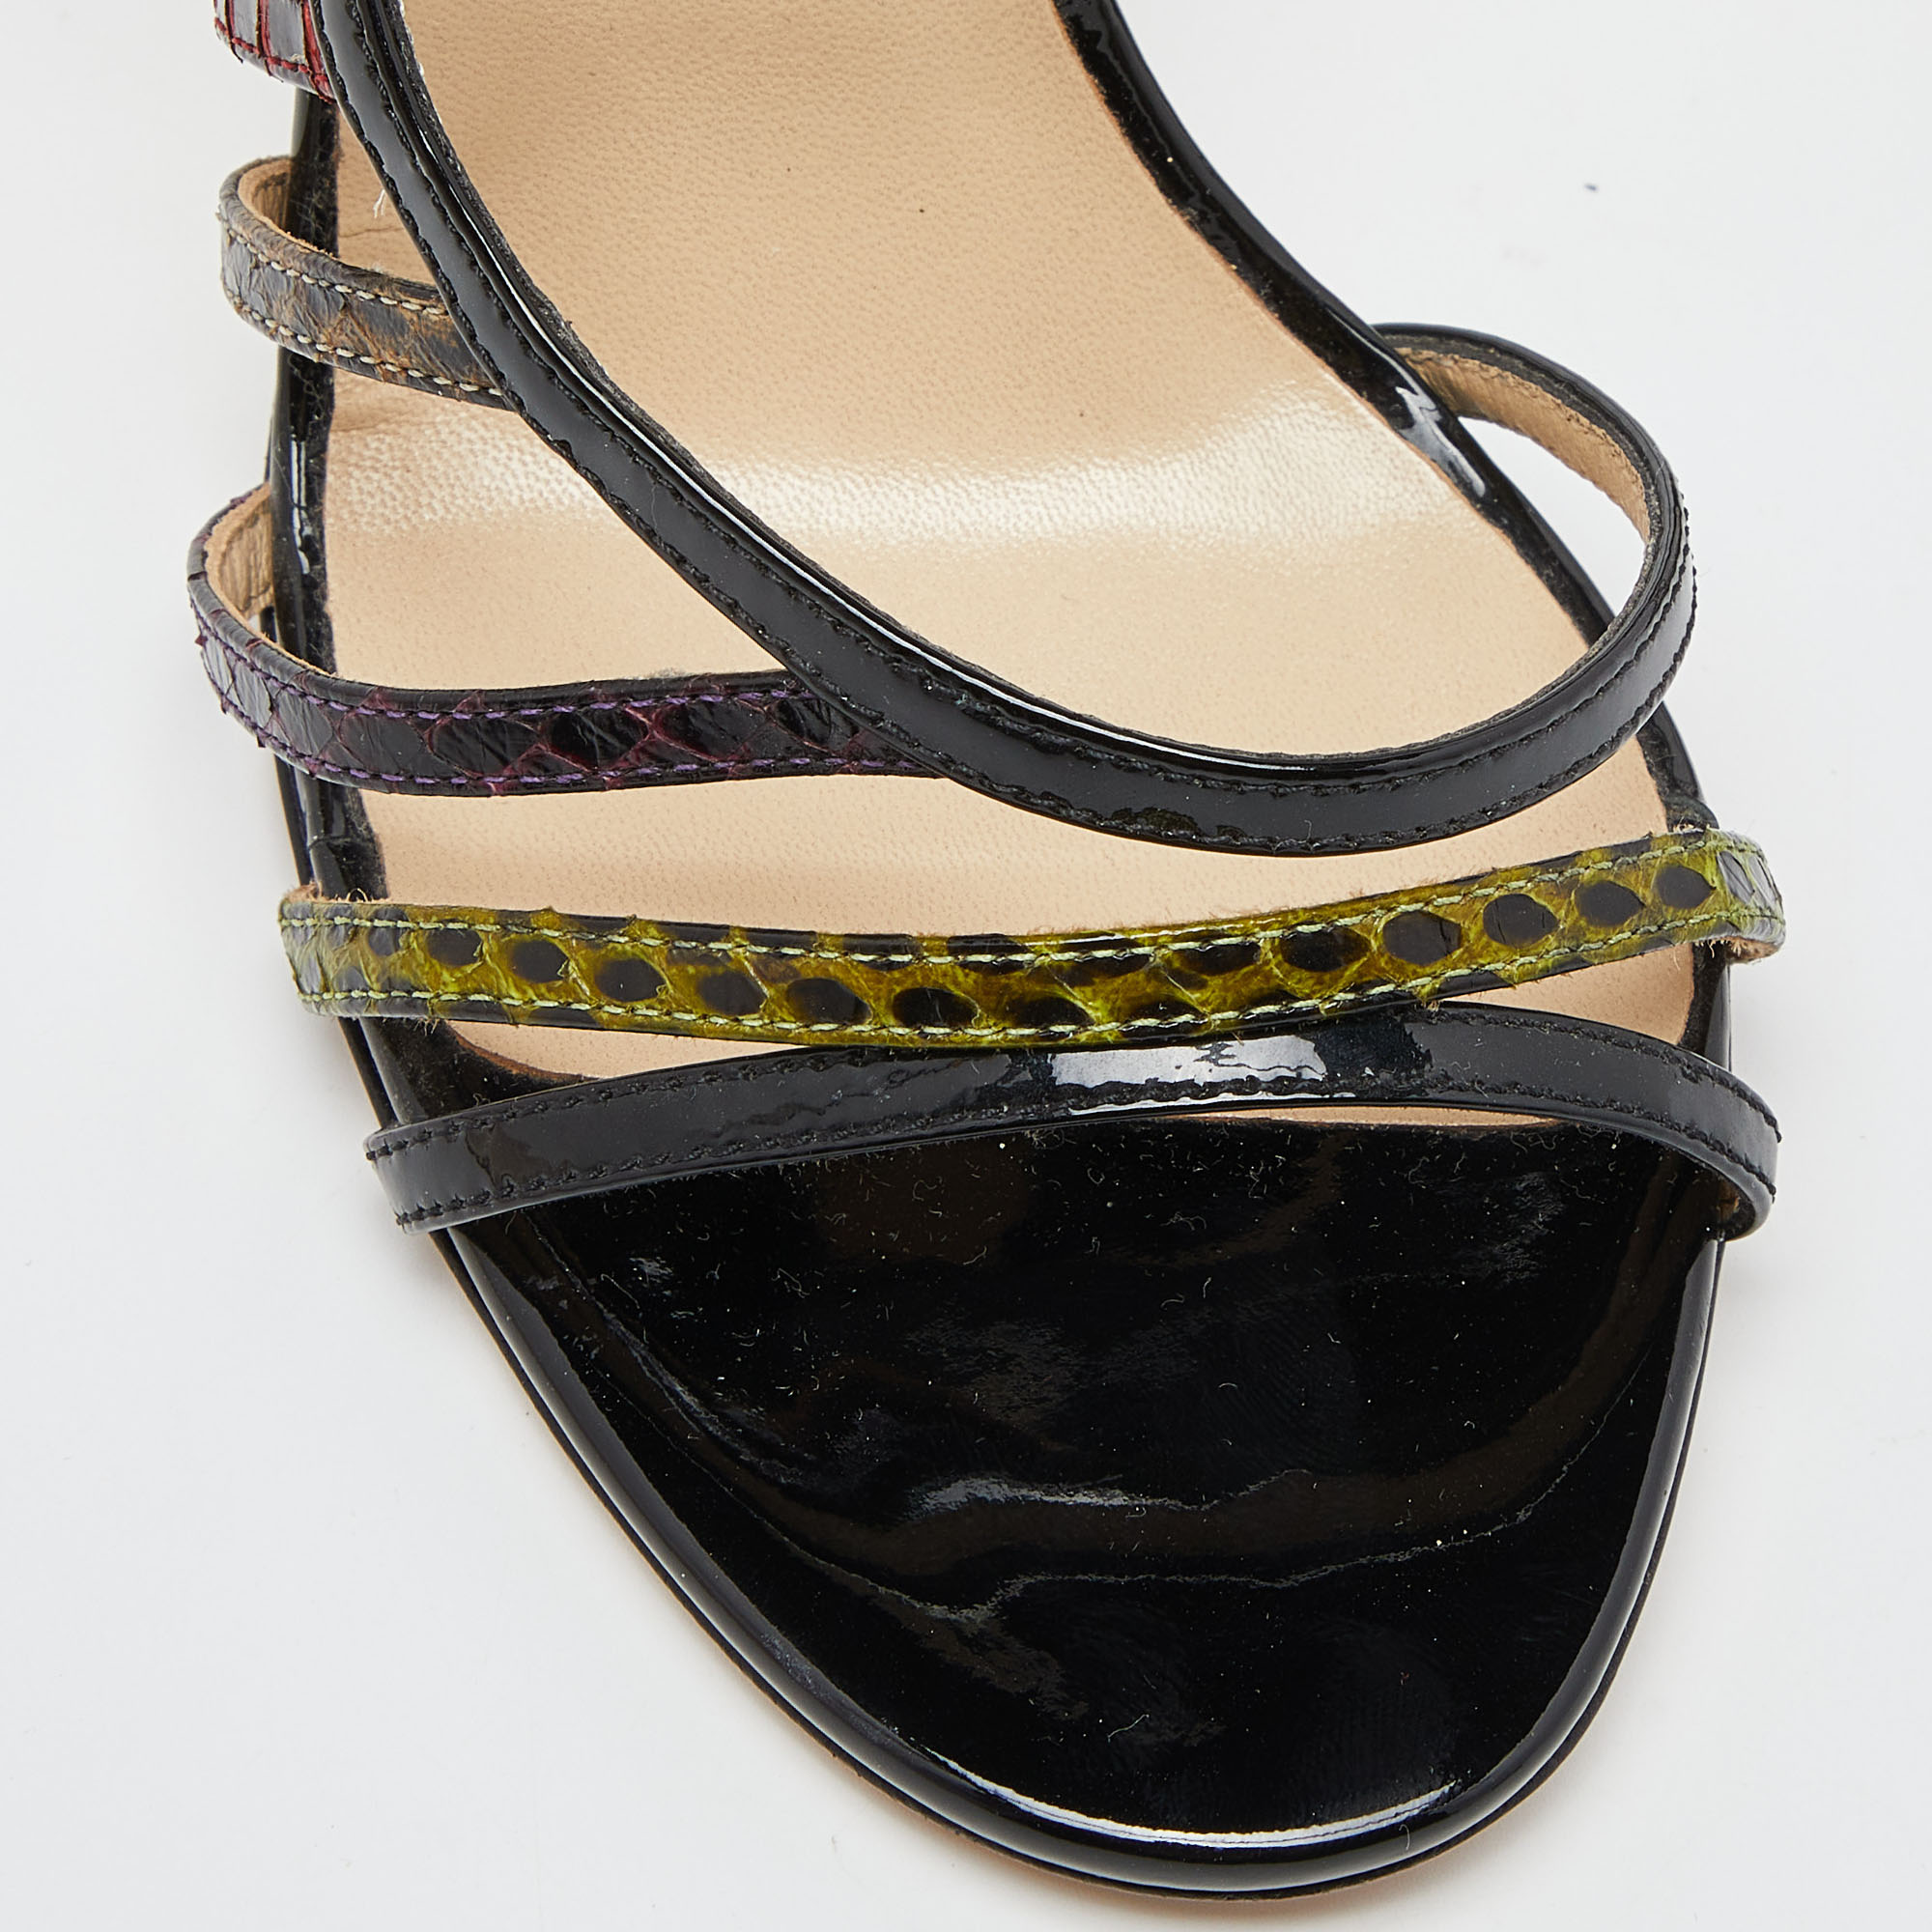 Jimmy Choo Multicolor Snakeskin And Patent Leather Strappy Sandals Size 37